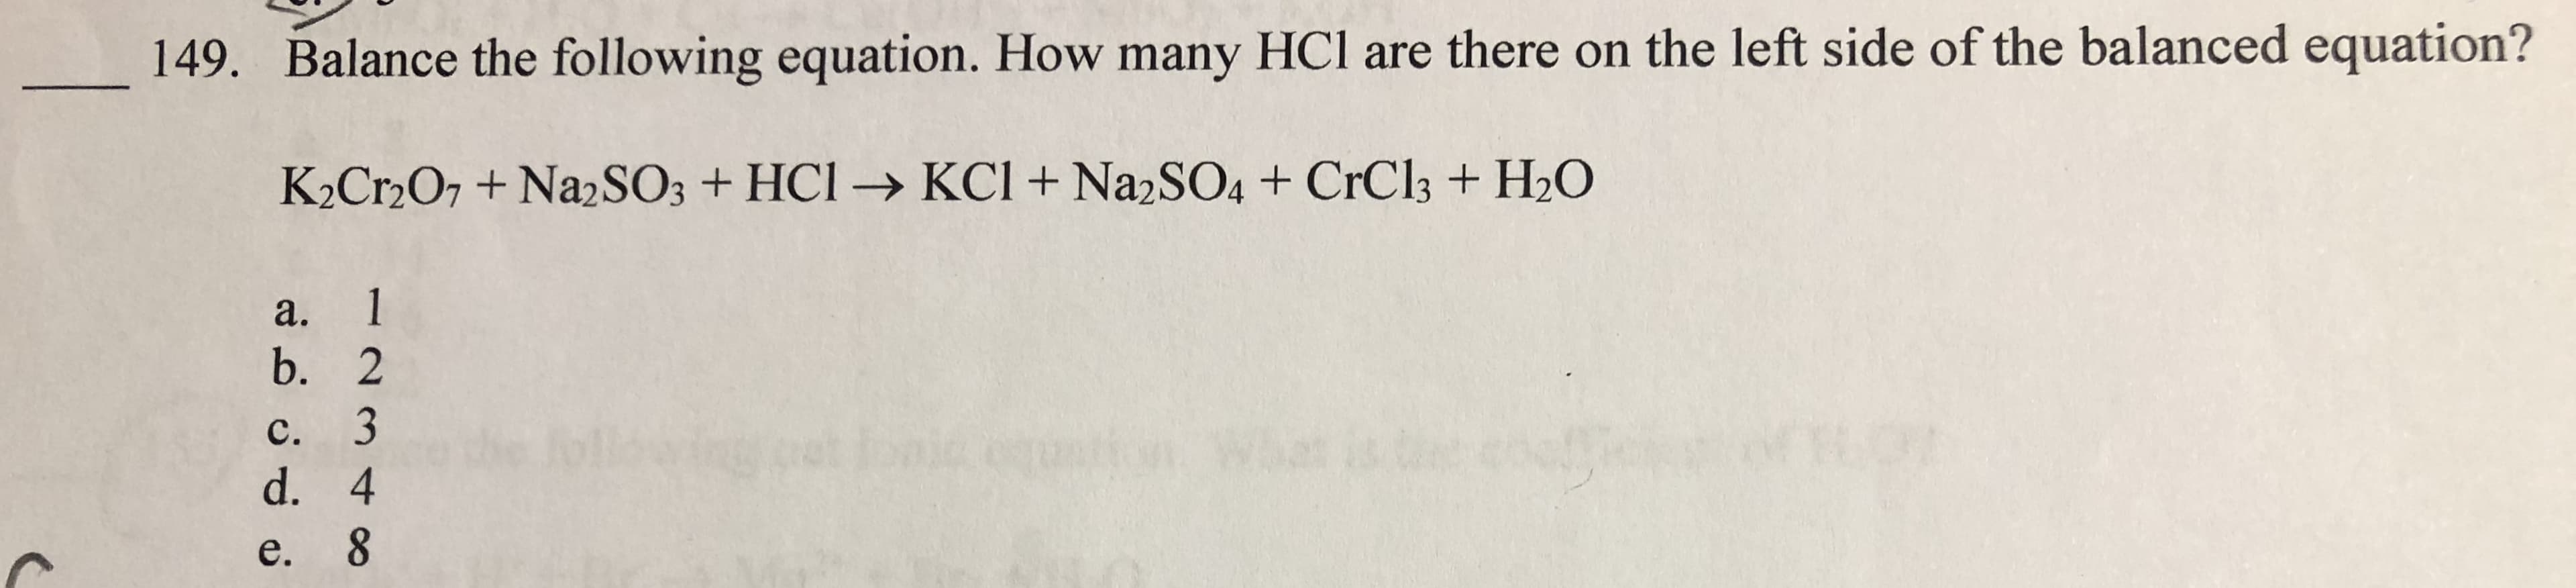 149.
Balance
the
following
equation.
How
many
lHCI
are
there
on
the
left
side
of
the
balanced
equation?
a.
C.
e.
